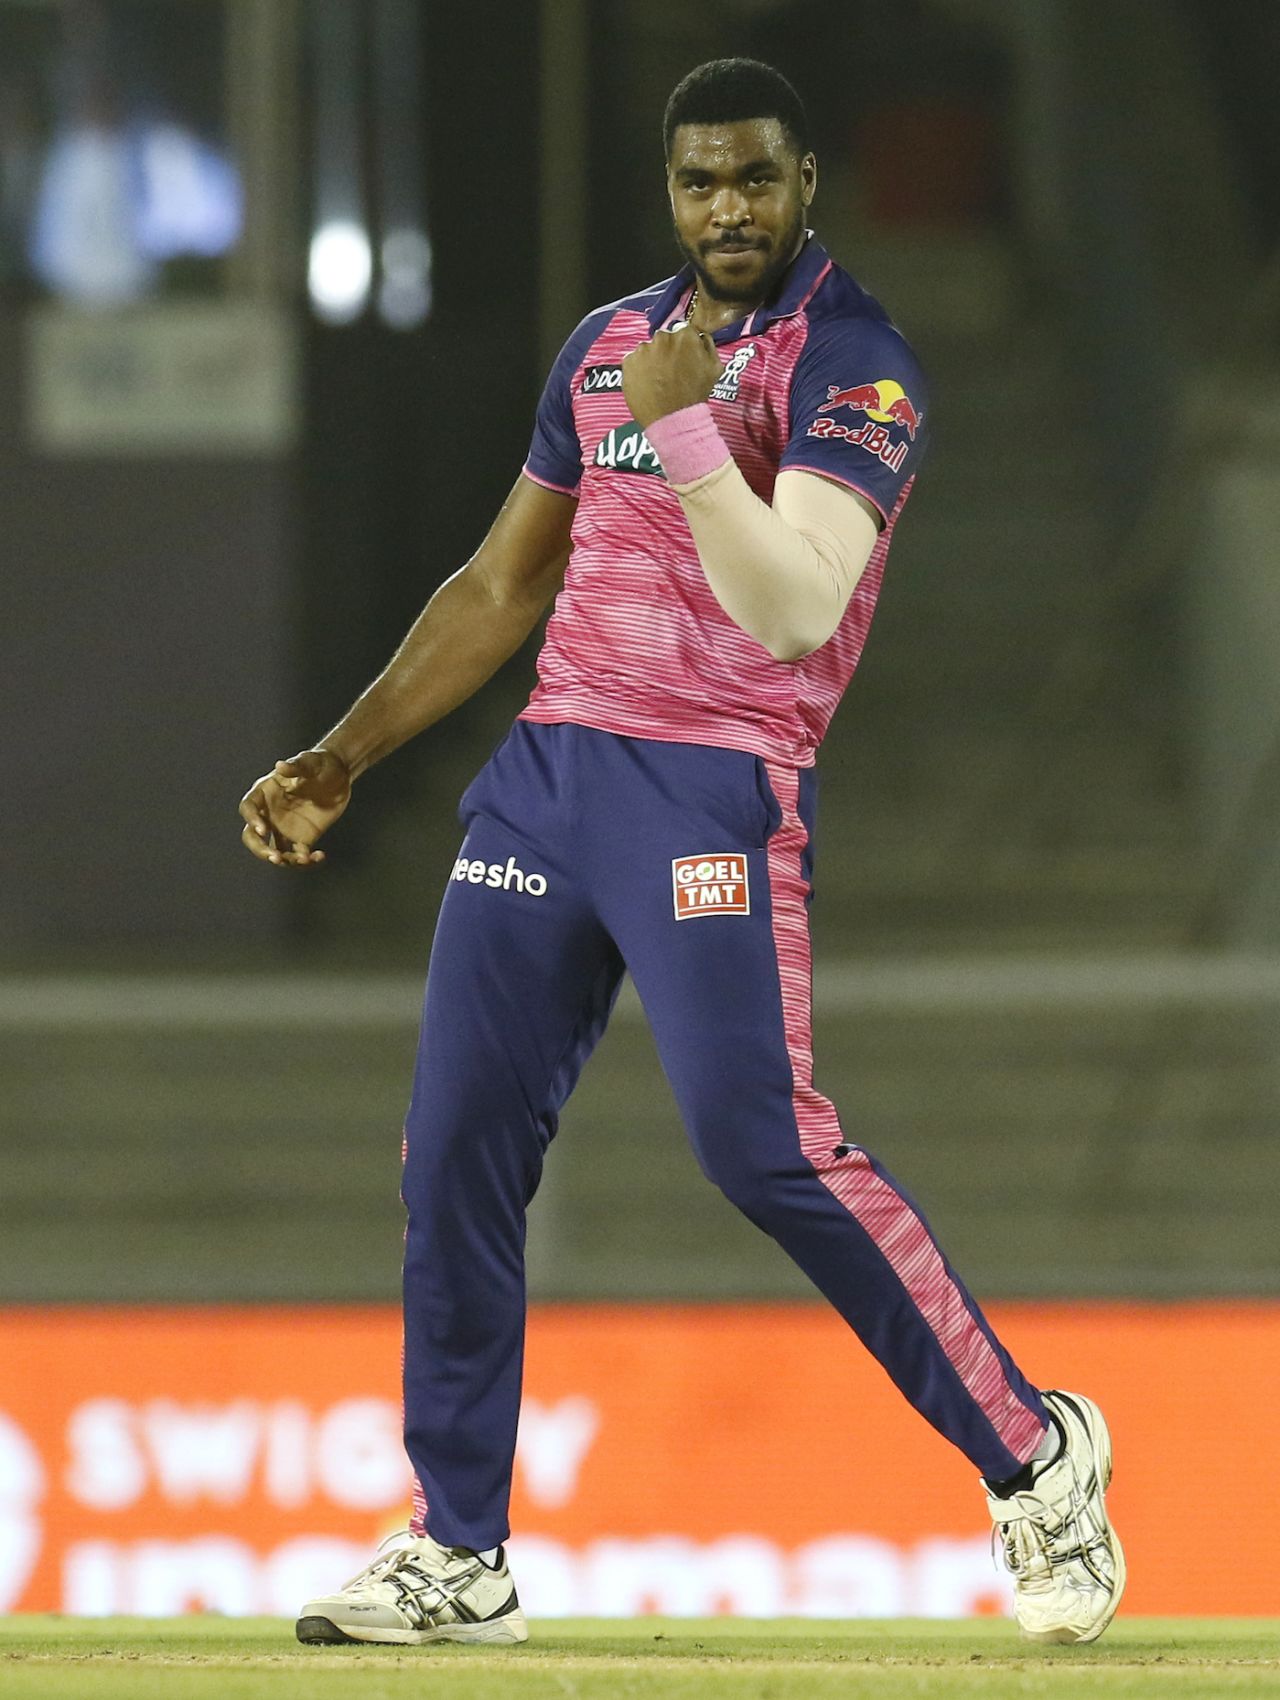 Obed McCoy had a great night with the ball, Chennai Super Kings vs Rajasthan Royals, IPL 2022, Brabourne Stadium, Mumbai, May 20, 2022